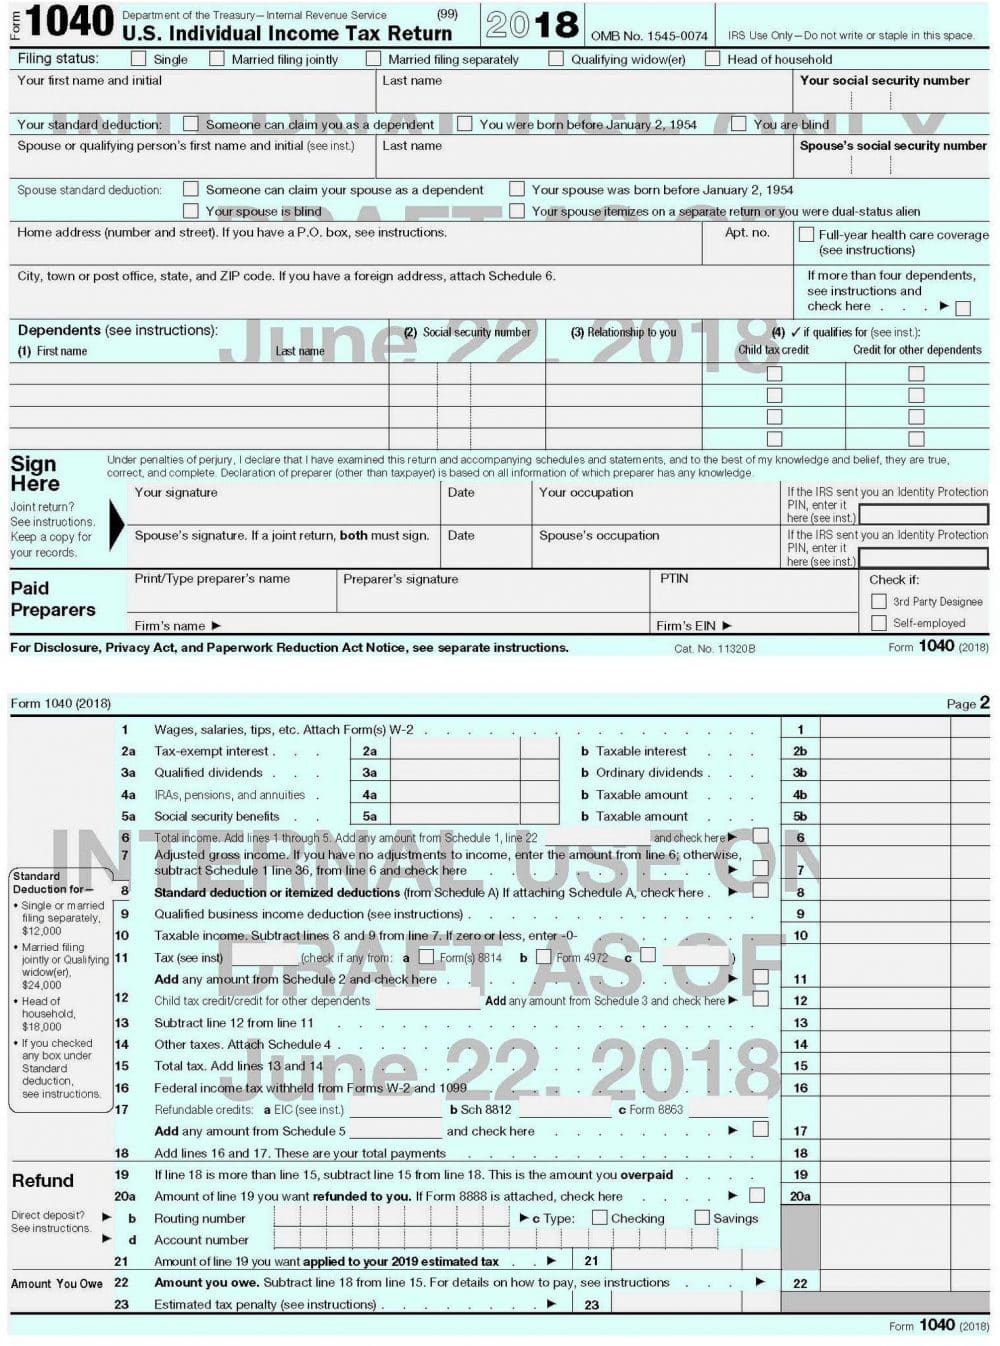 New form tax report 1040 will be more difficult old